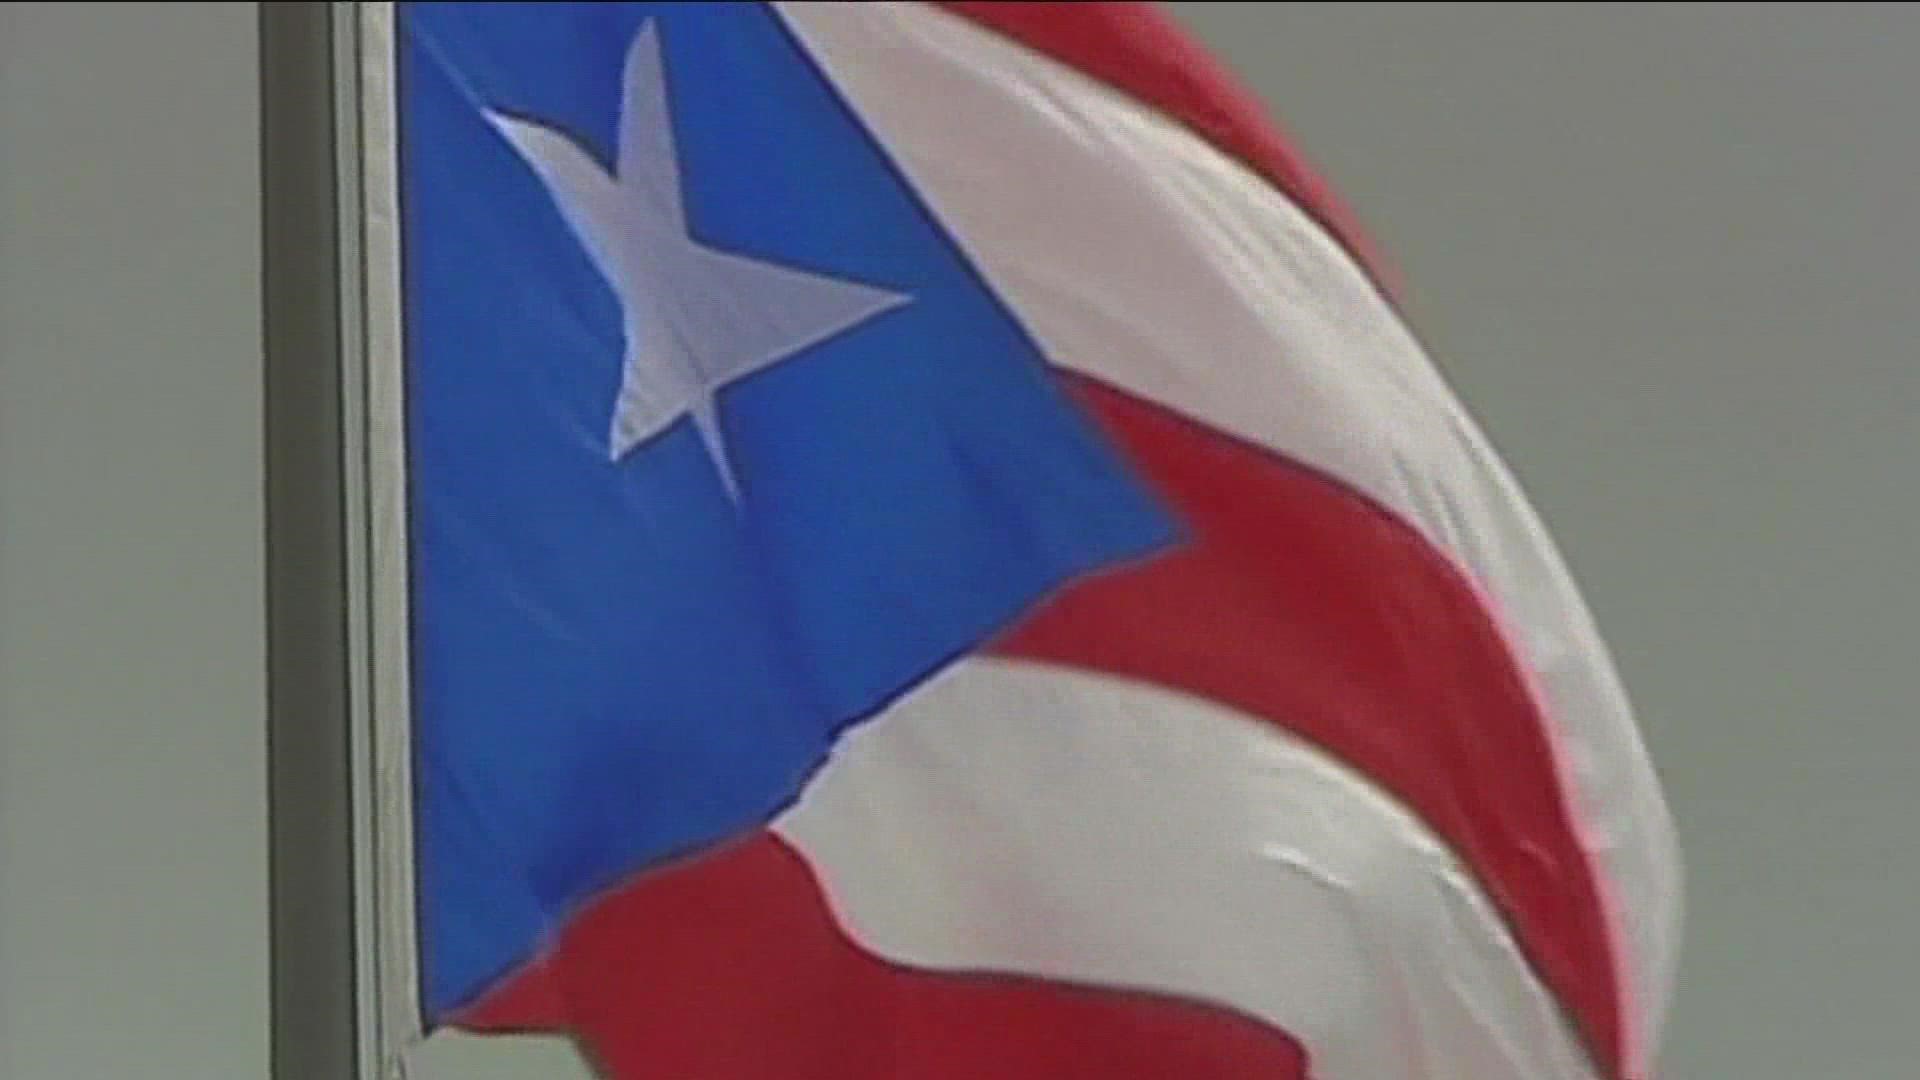 A bill passed by the US would allow Puerto Ricans to vote on whether the territory becomes a state or its own country.